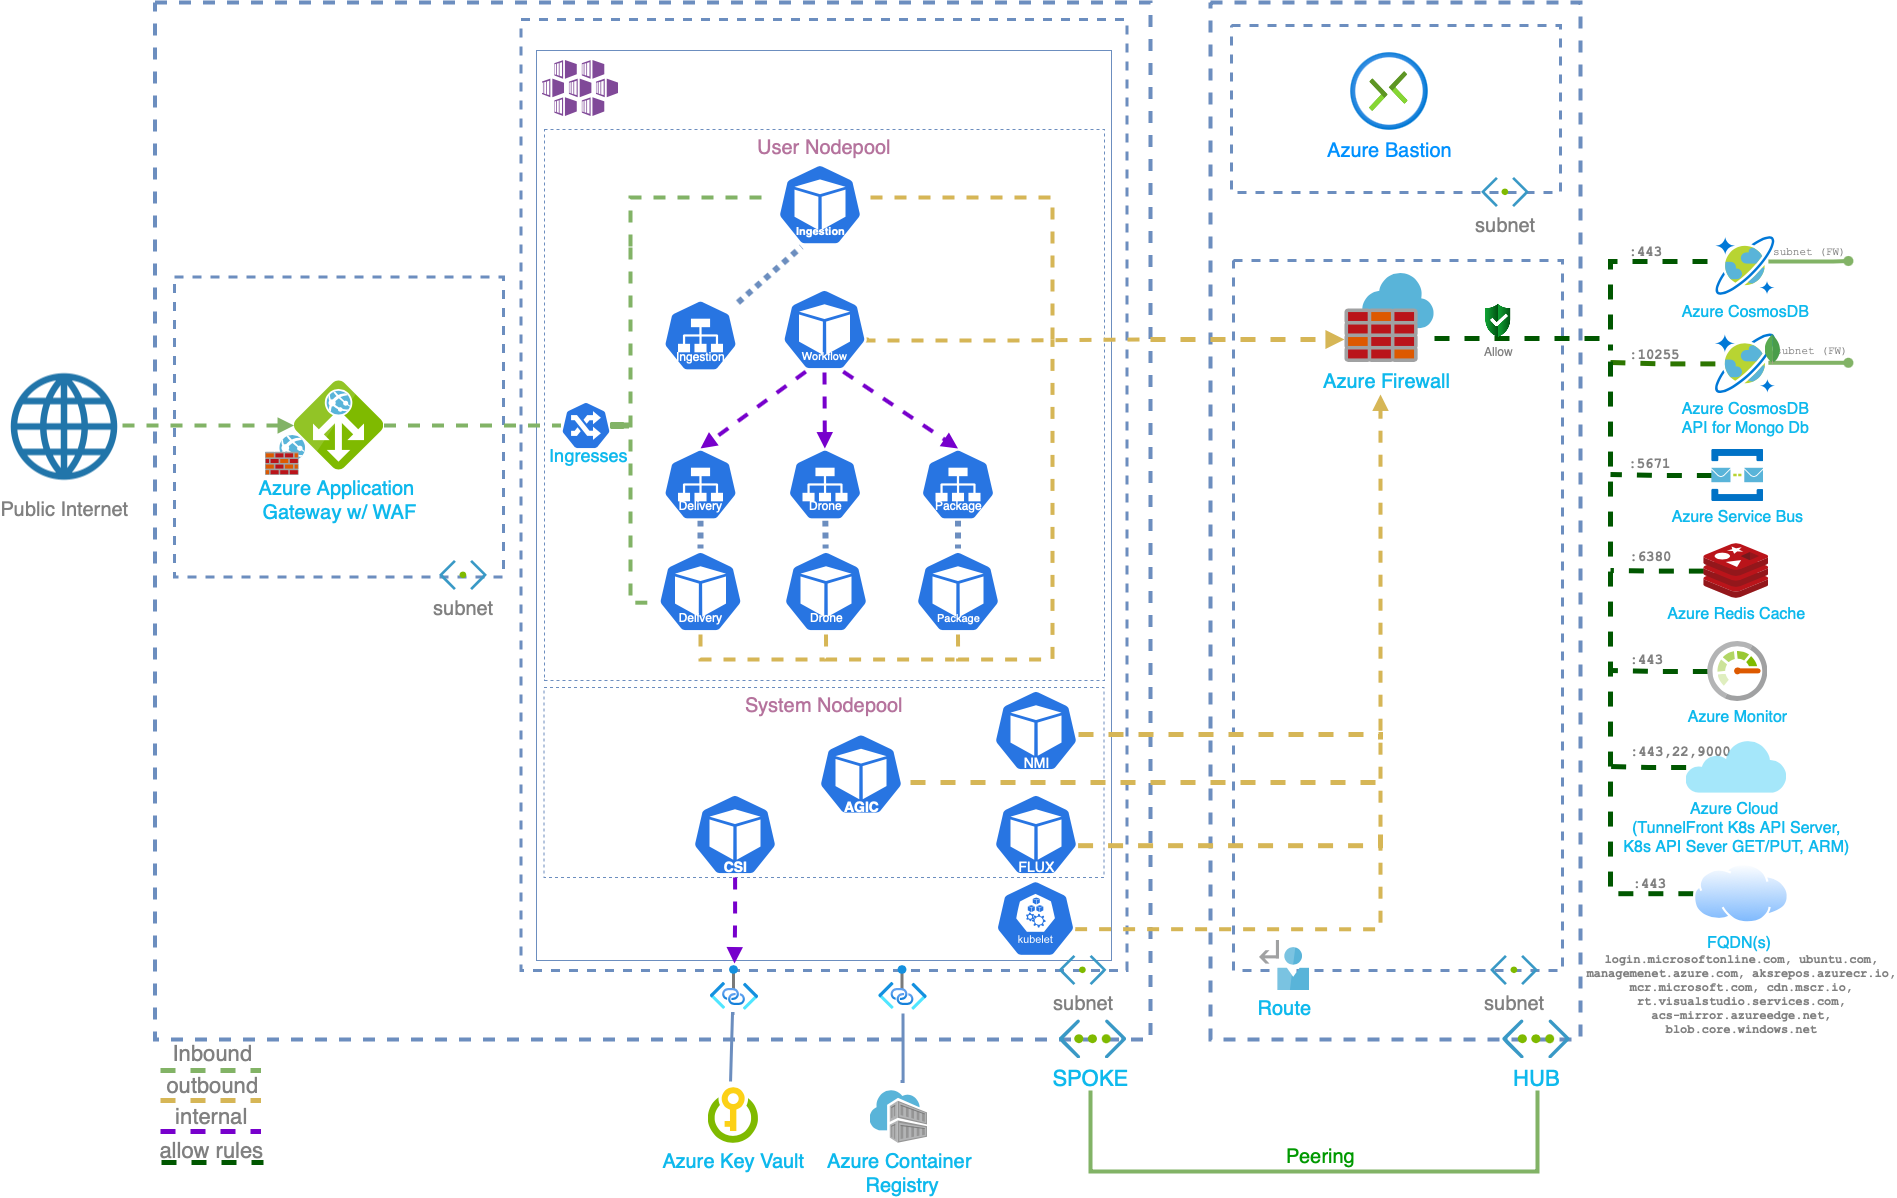 Network diagram depicting a hub-spoke network with two peered VNets, each with three subnets and main Azure resources.